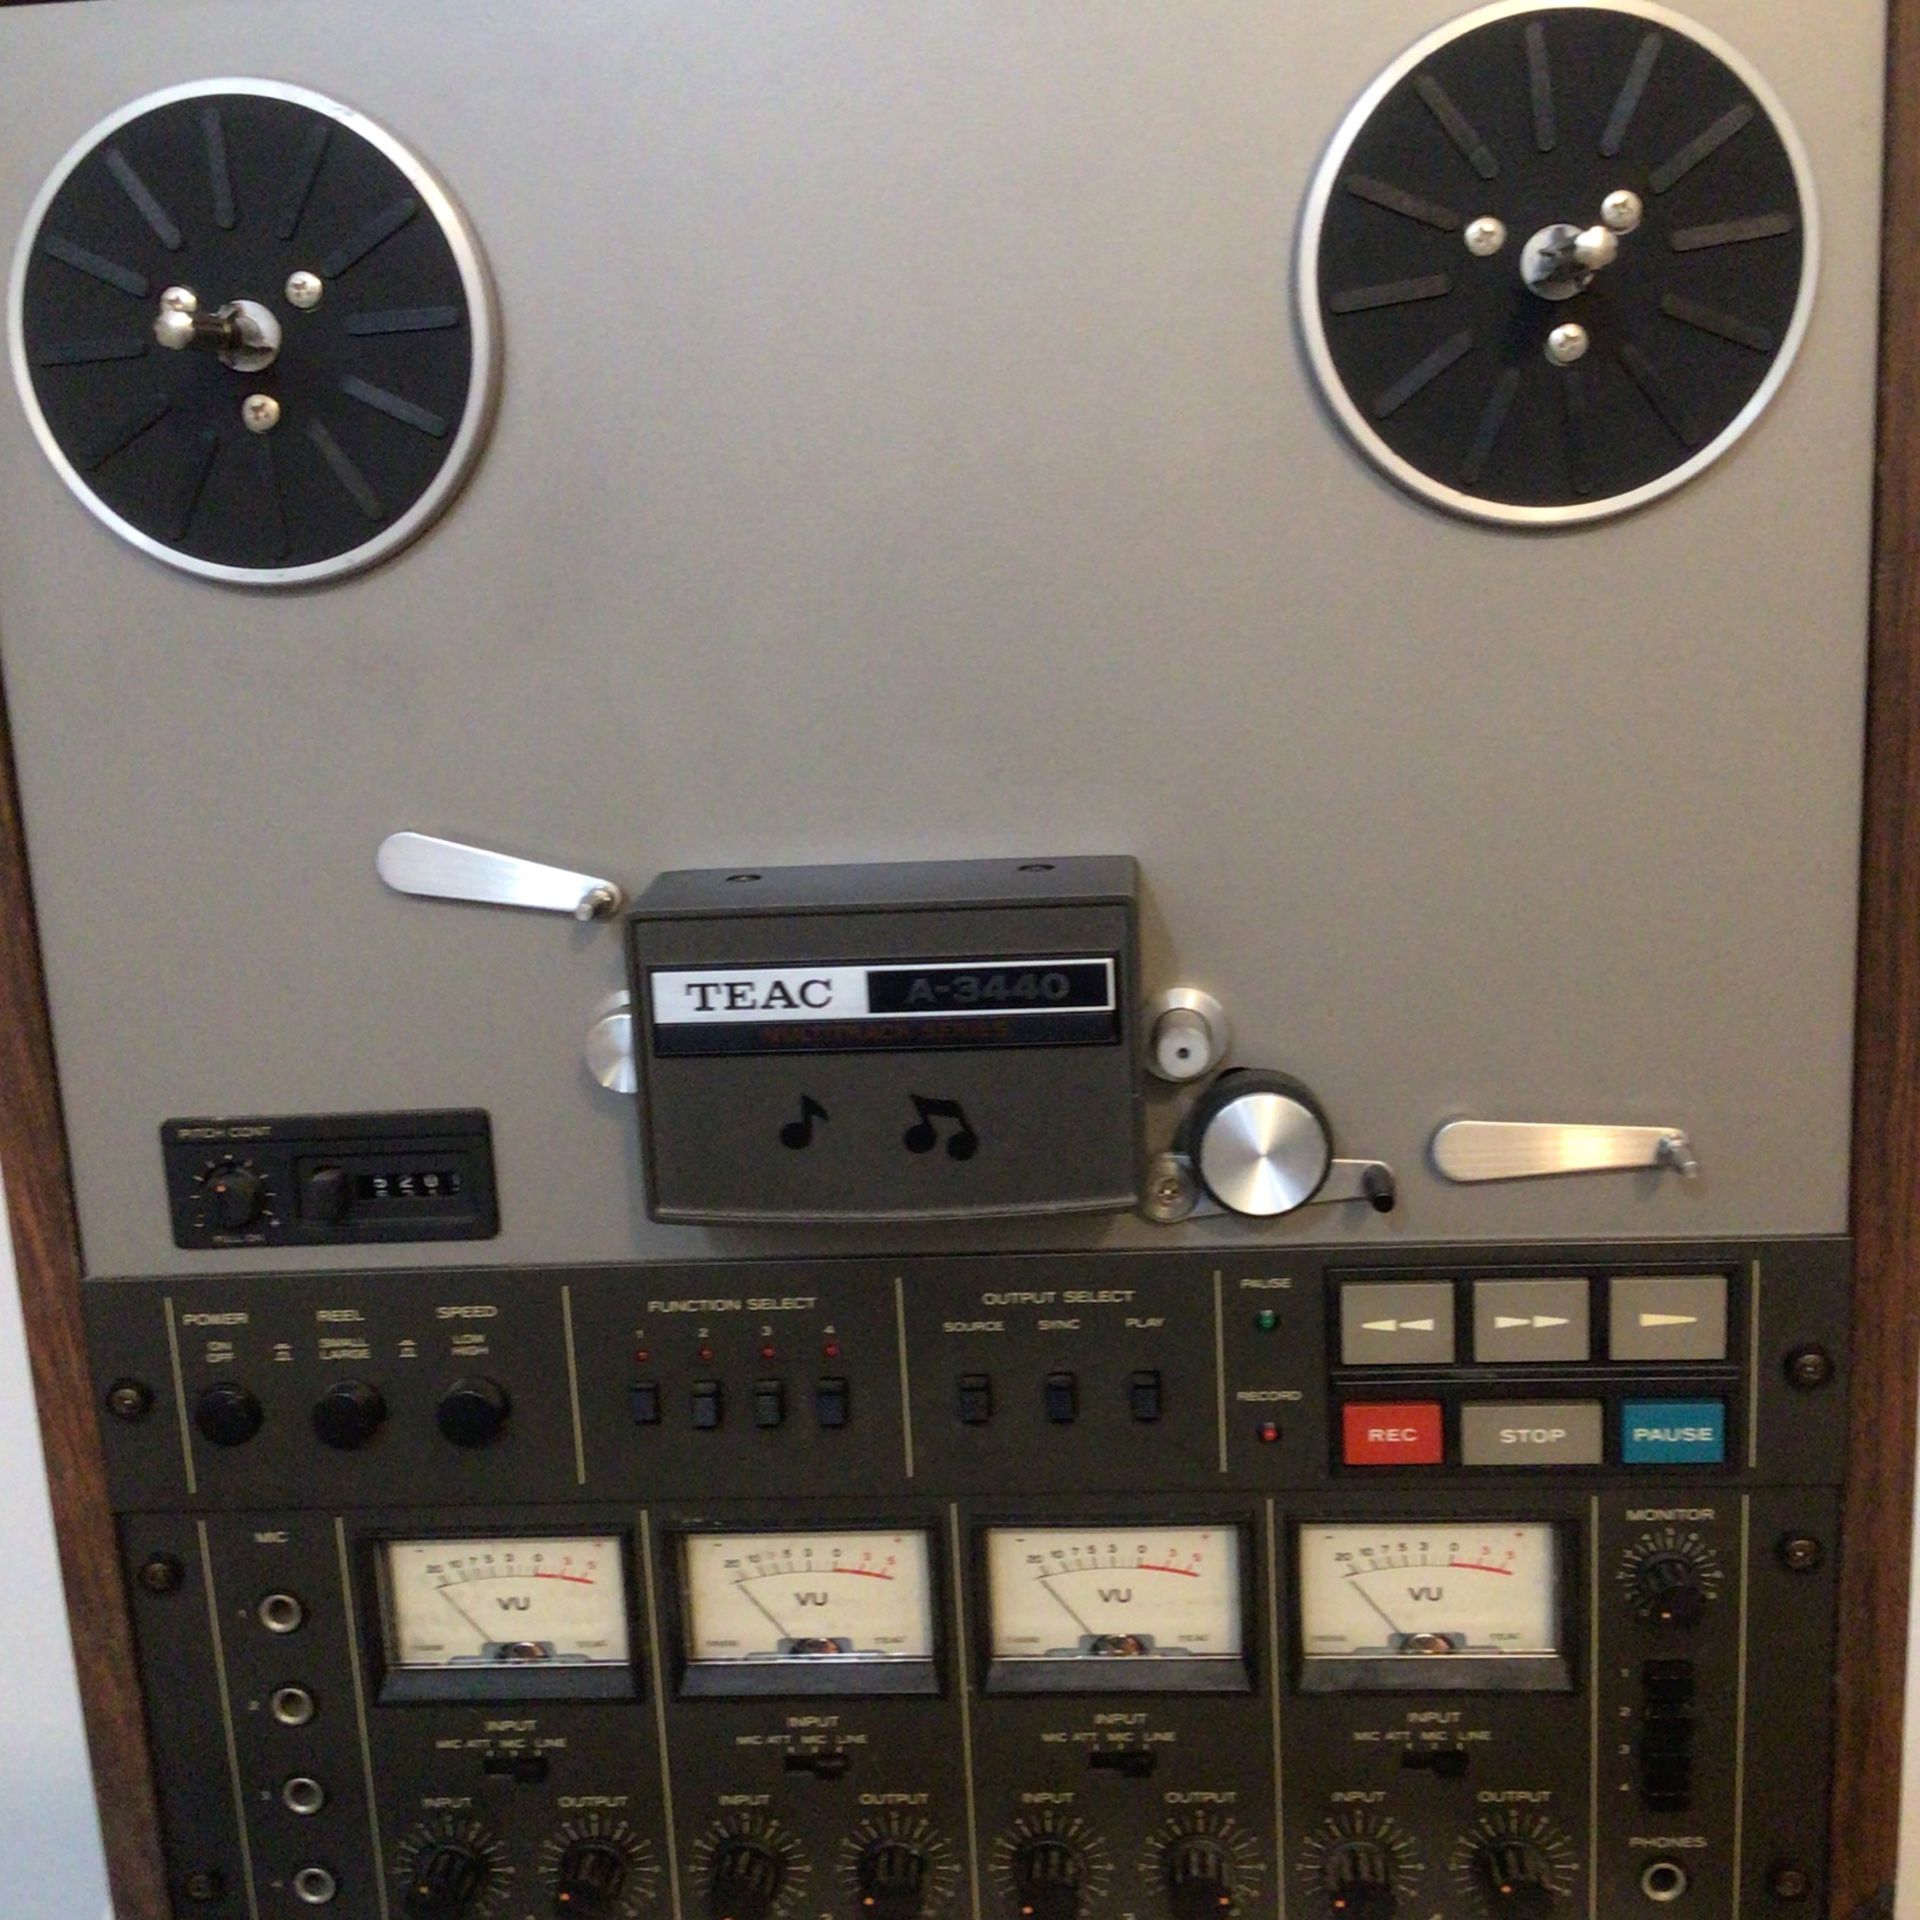 TEAC A-3440 Multitrack Reel To Reel Tape Recorder